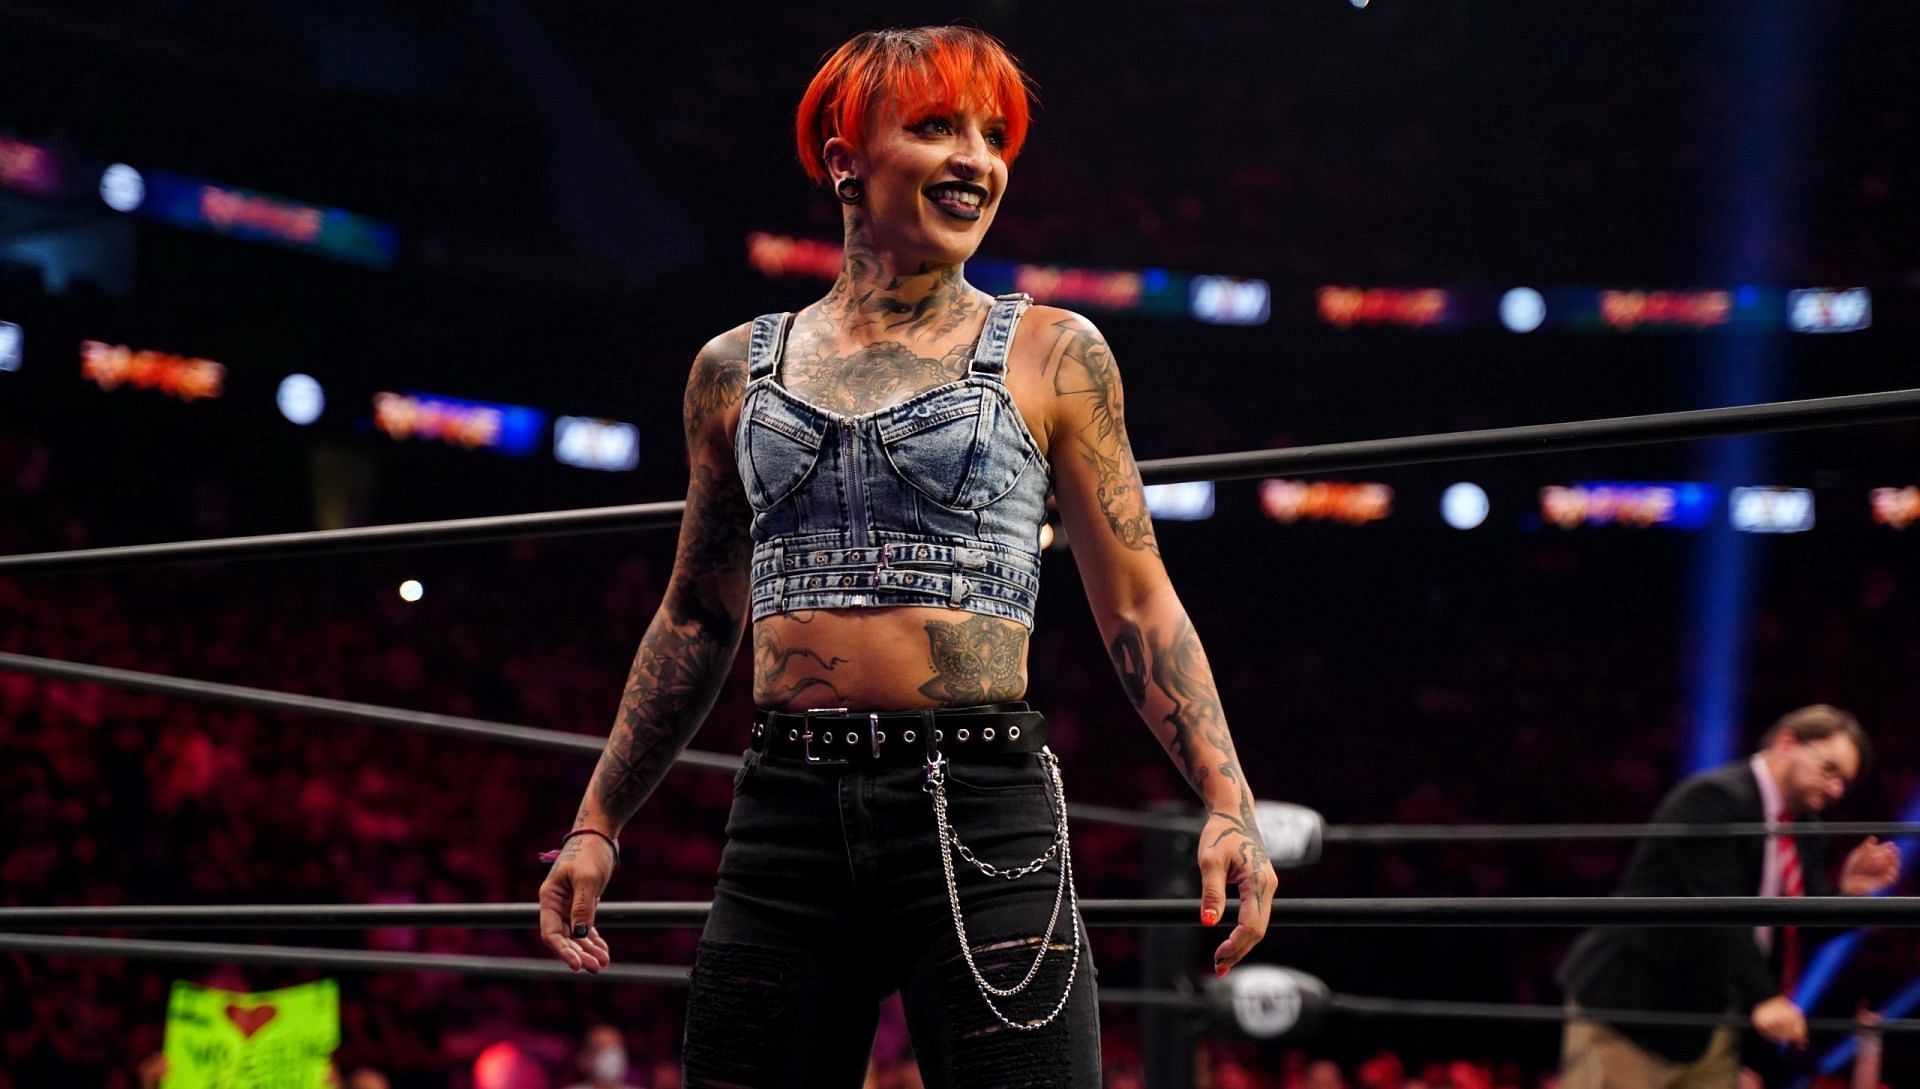 Ruby Soho worked with the ring name Ruby Riott in WWE